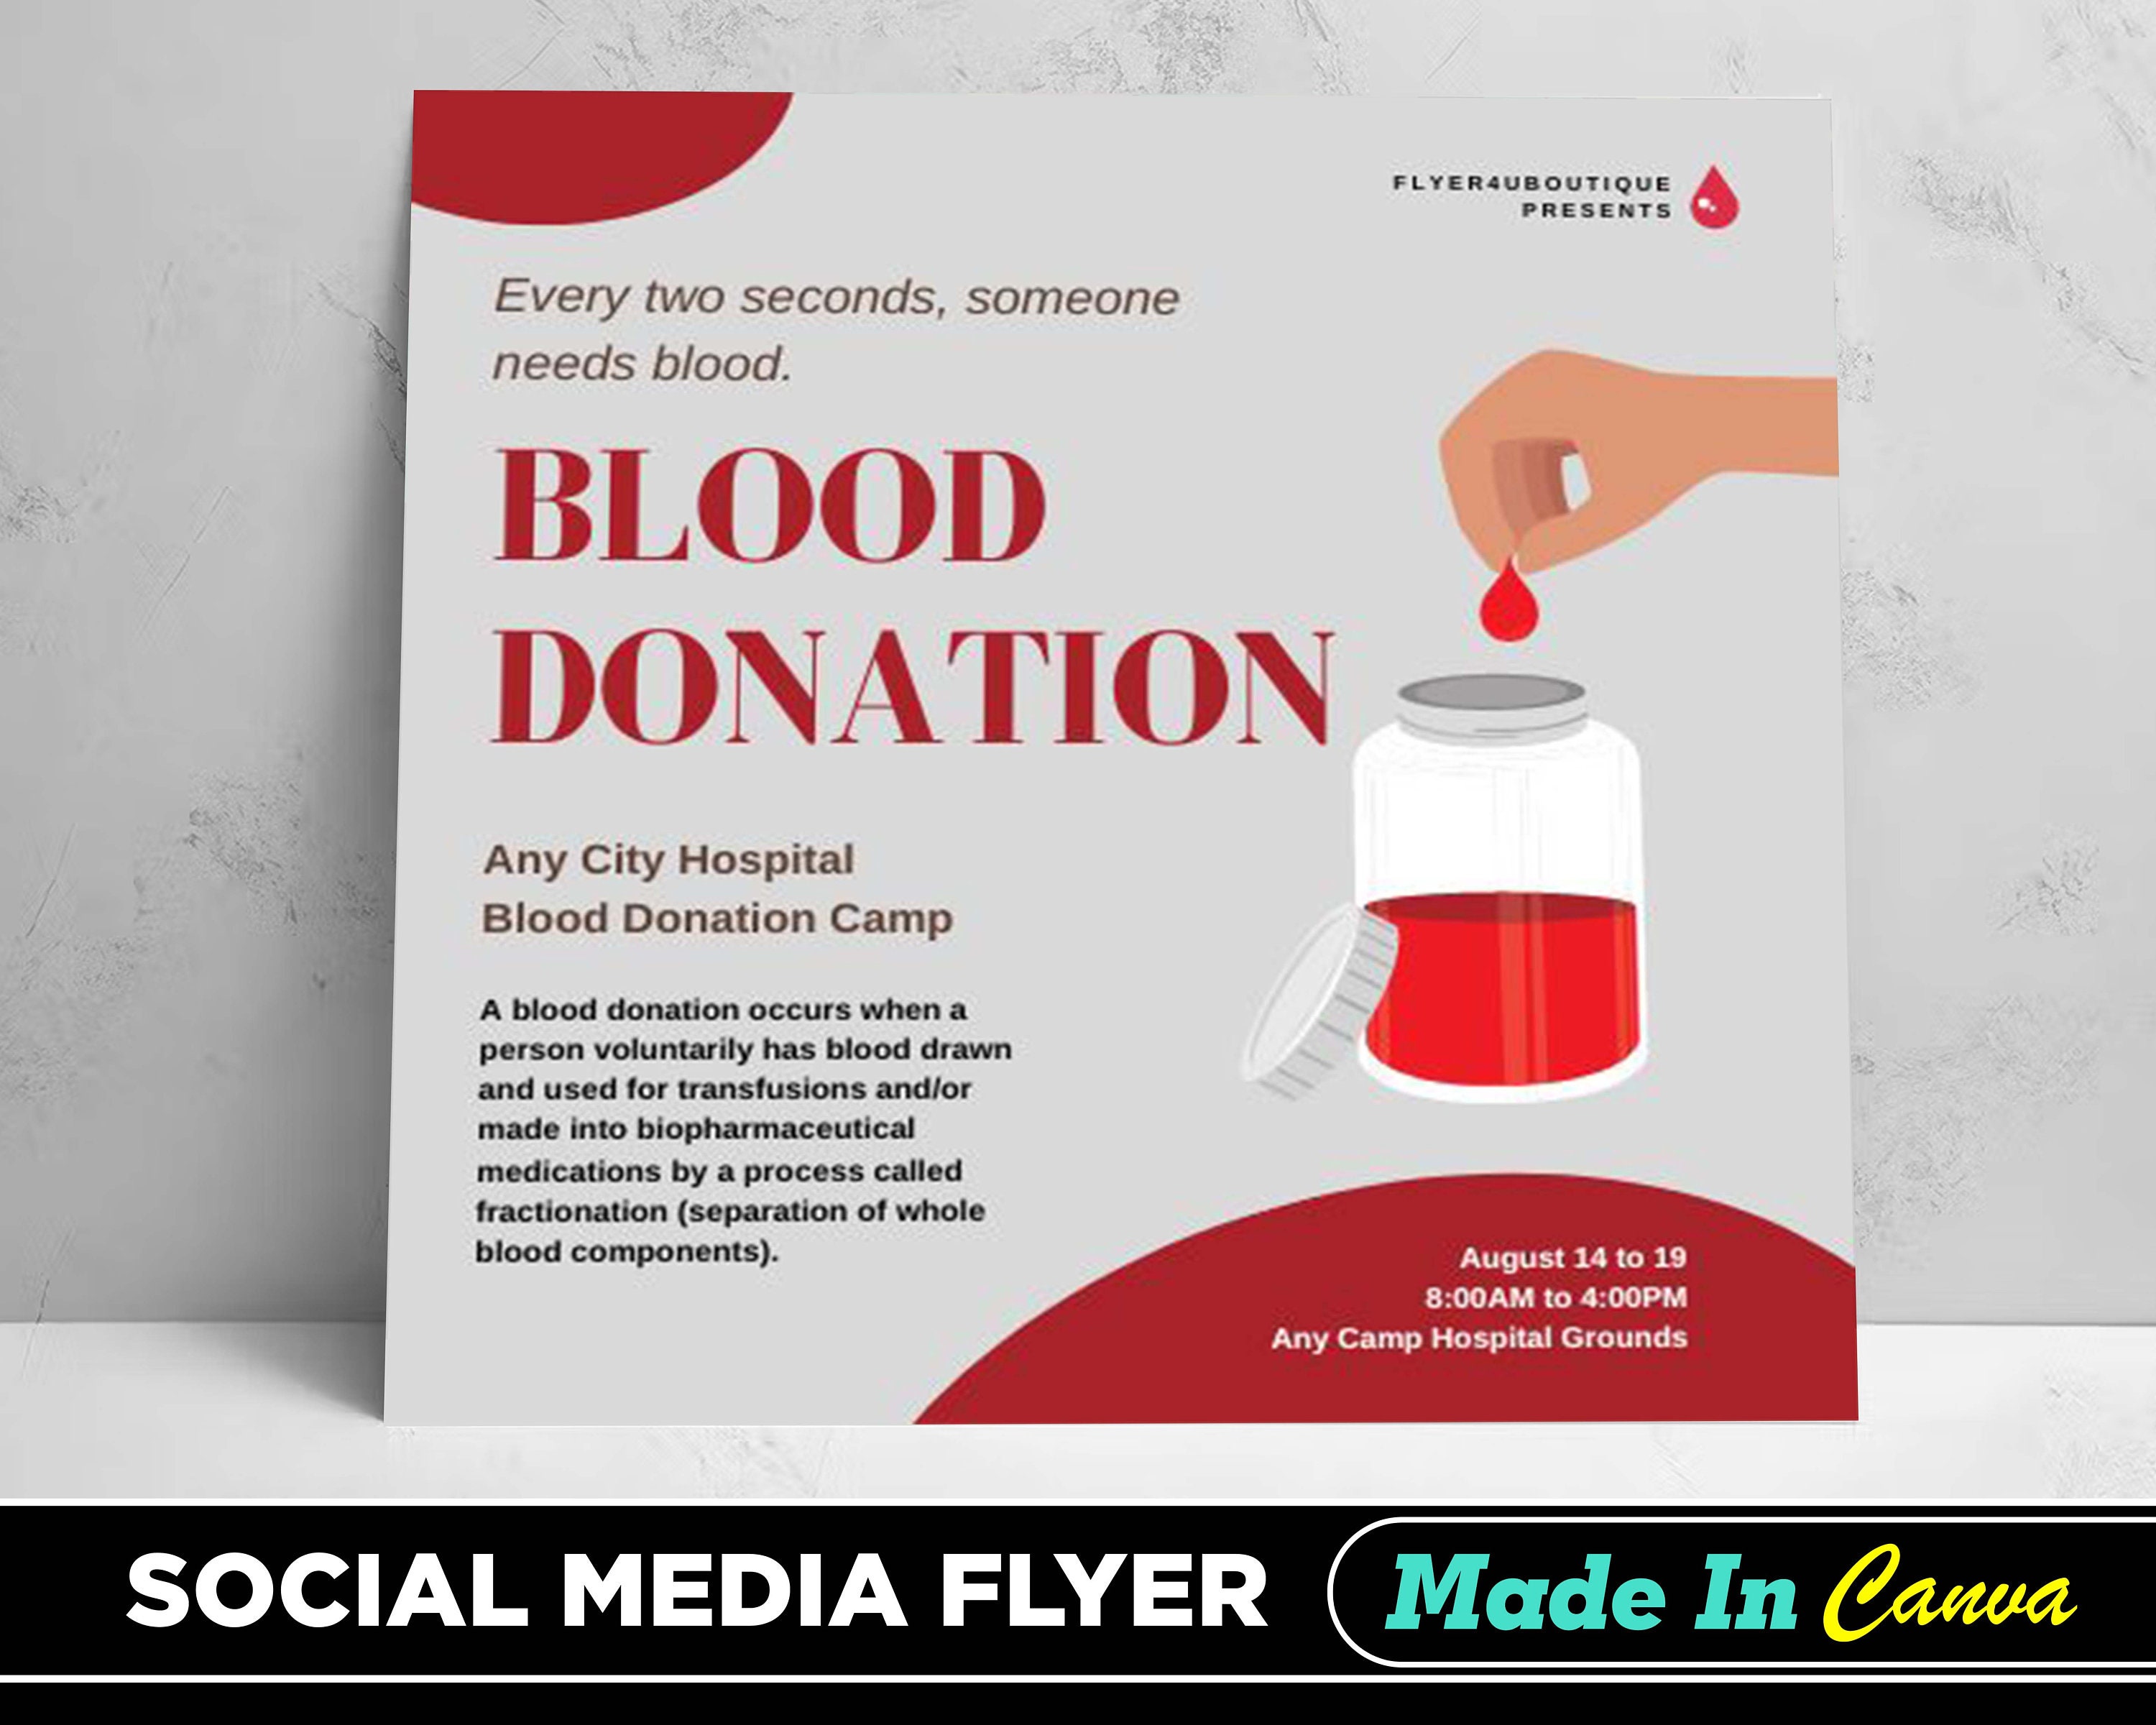 Super Hero Blood Donation Poster Stock Vector - Illustration of hospital,  button: 179235923